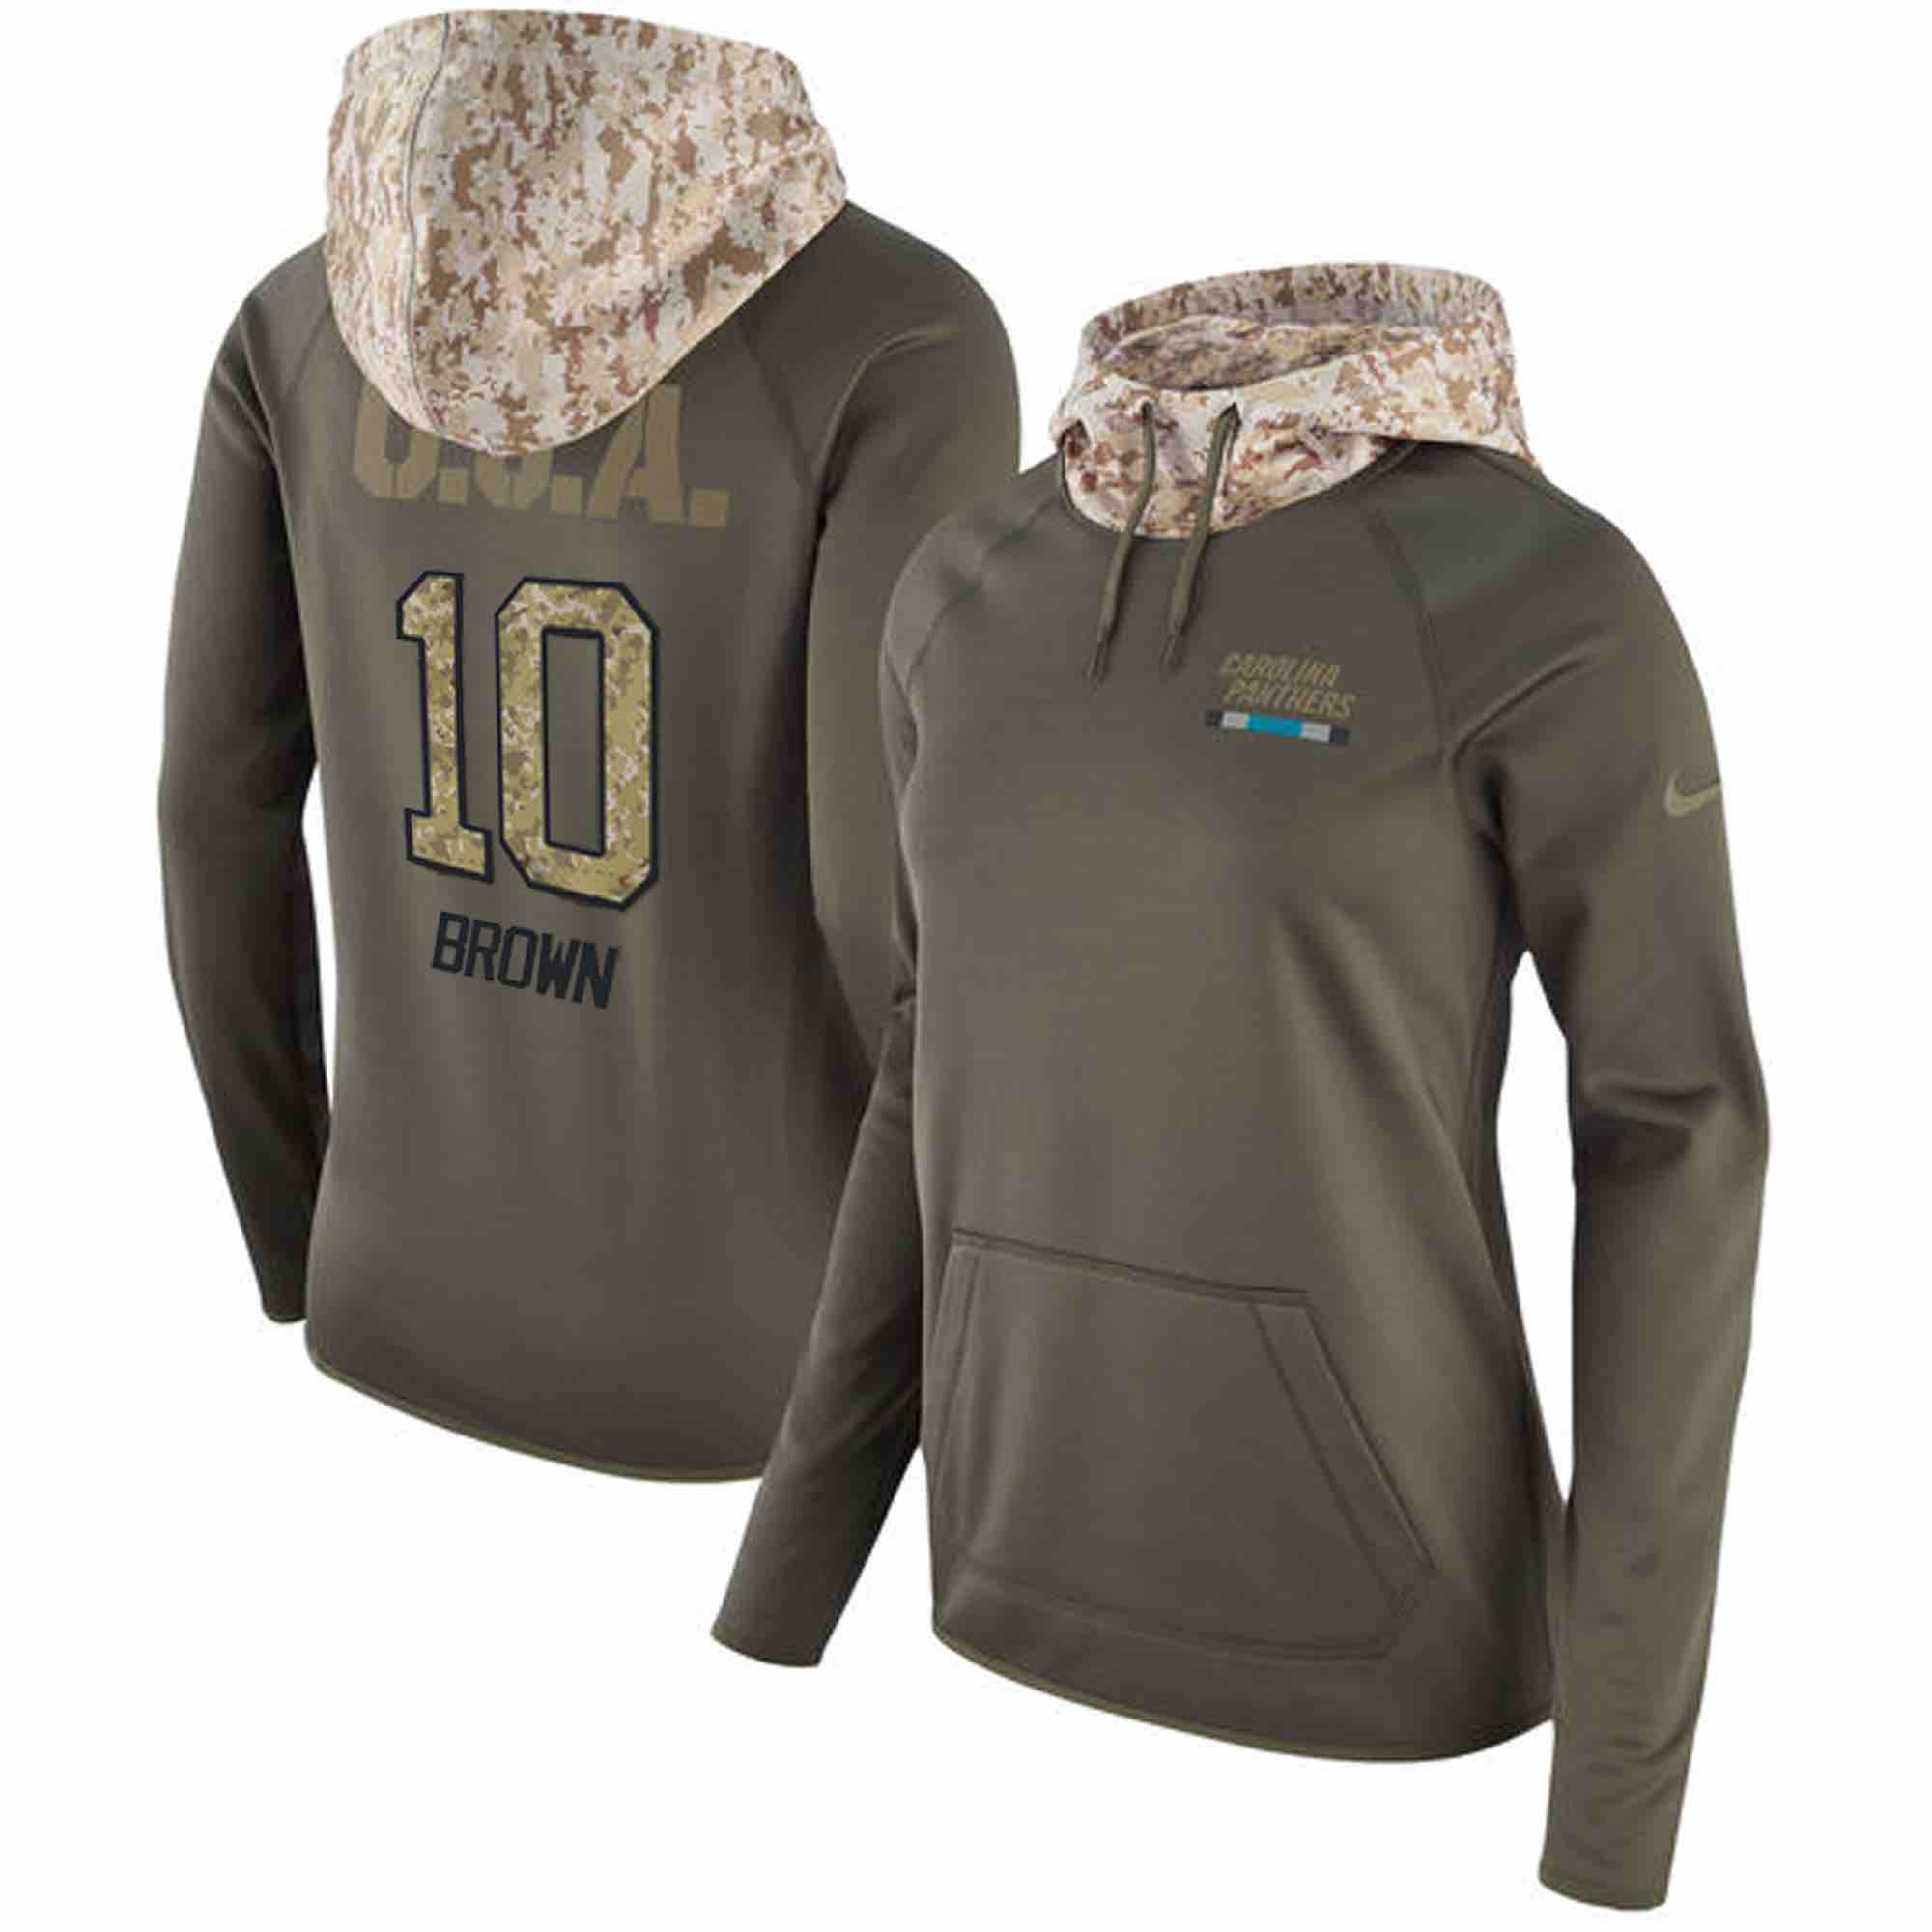 Womens NFL Carolina Panthers #10 Brwon Olive Salute to Service Hoodie